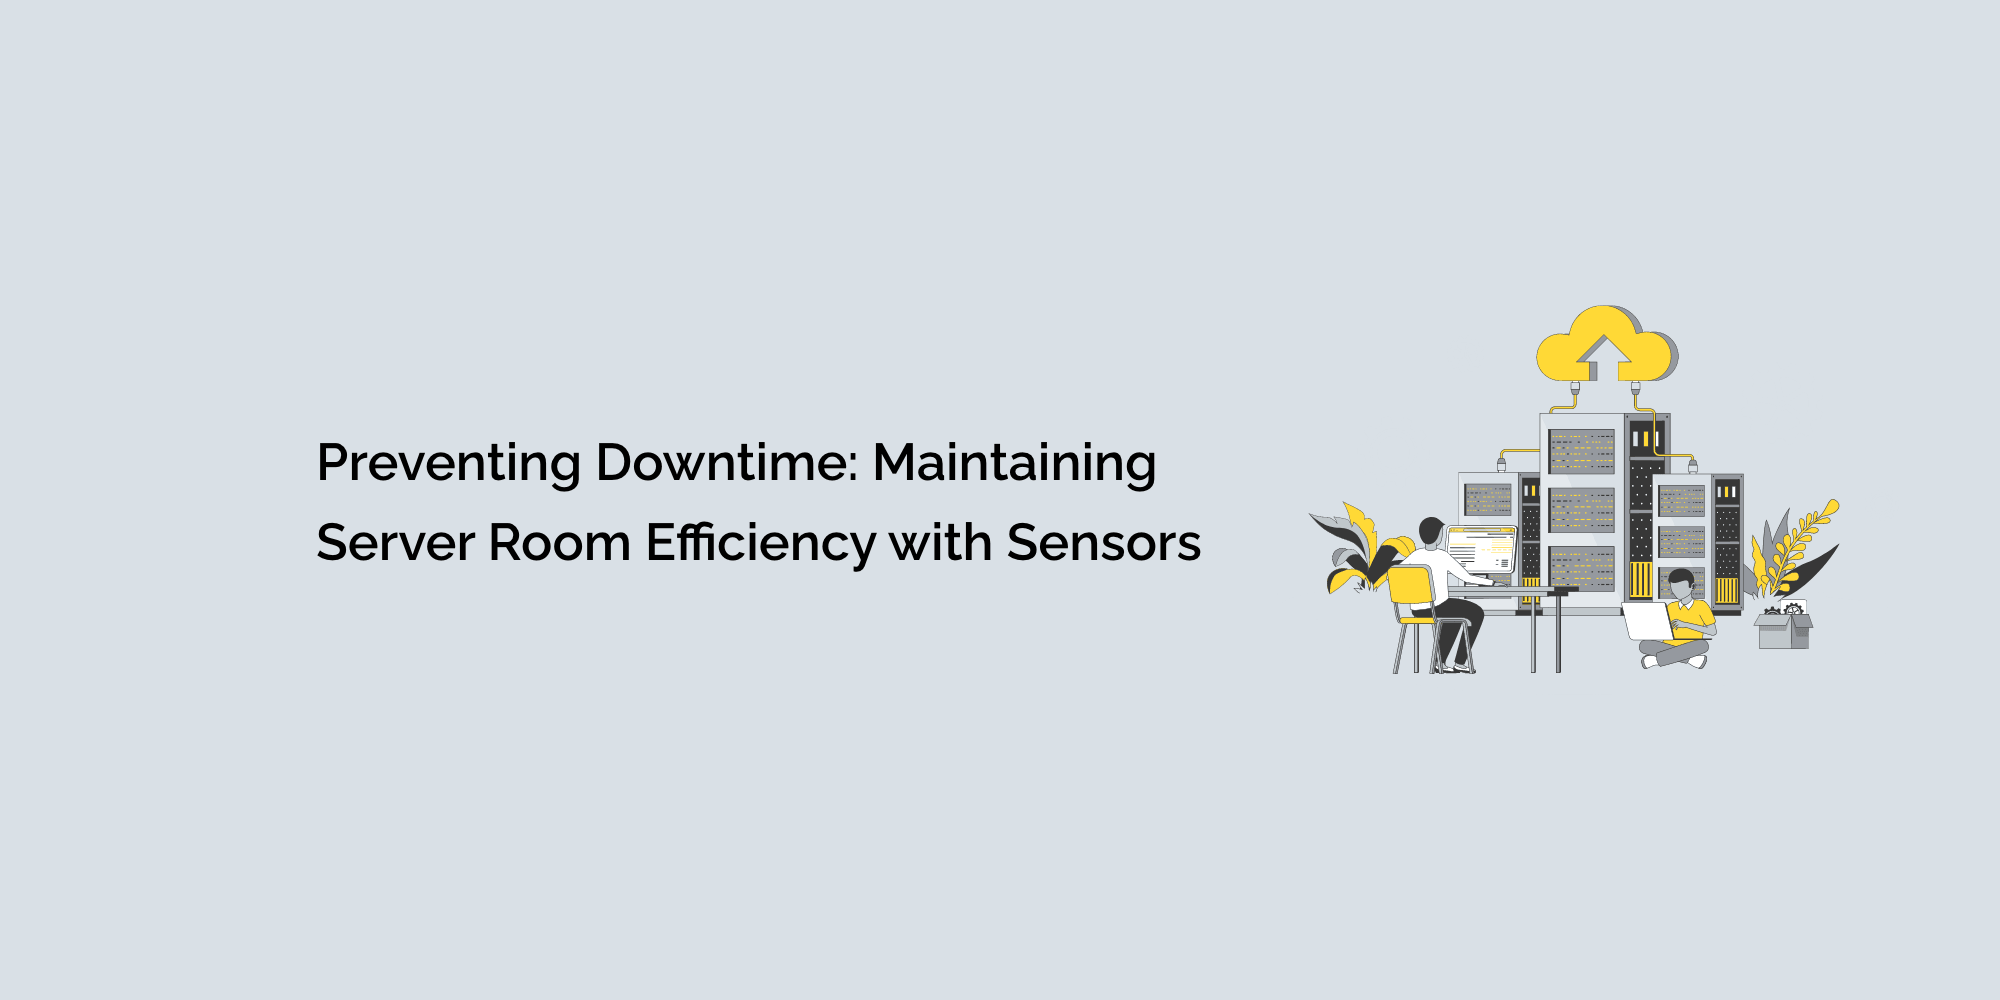 Preventing Downtime: Maintaining Server Room Efficiency with Sensors